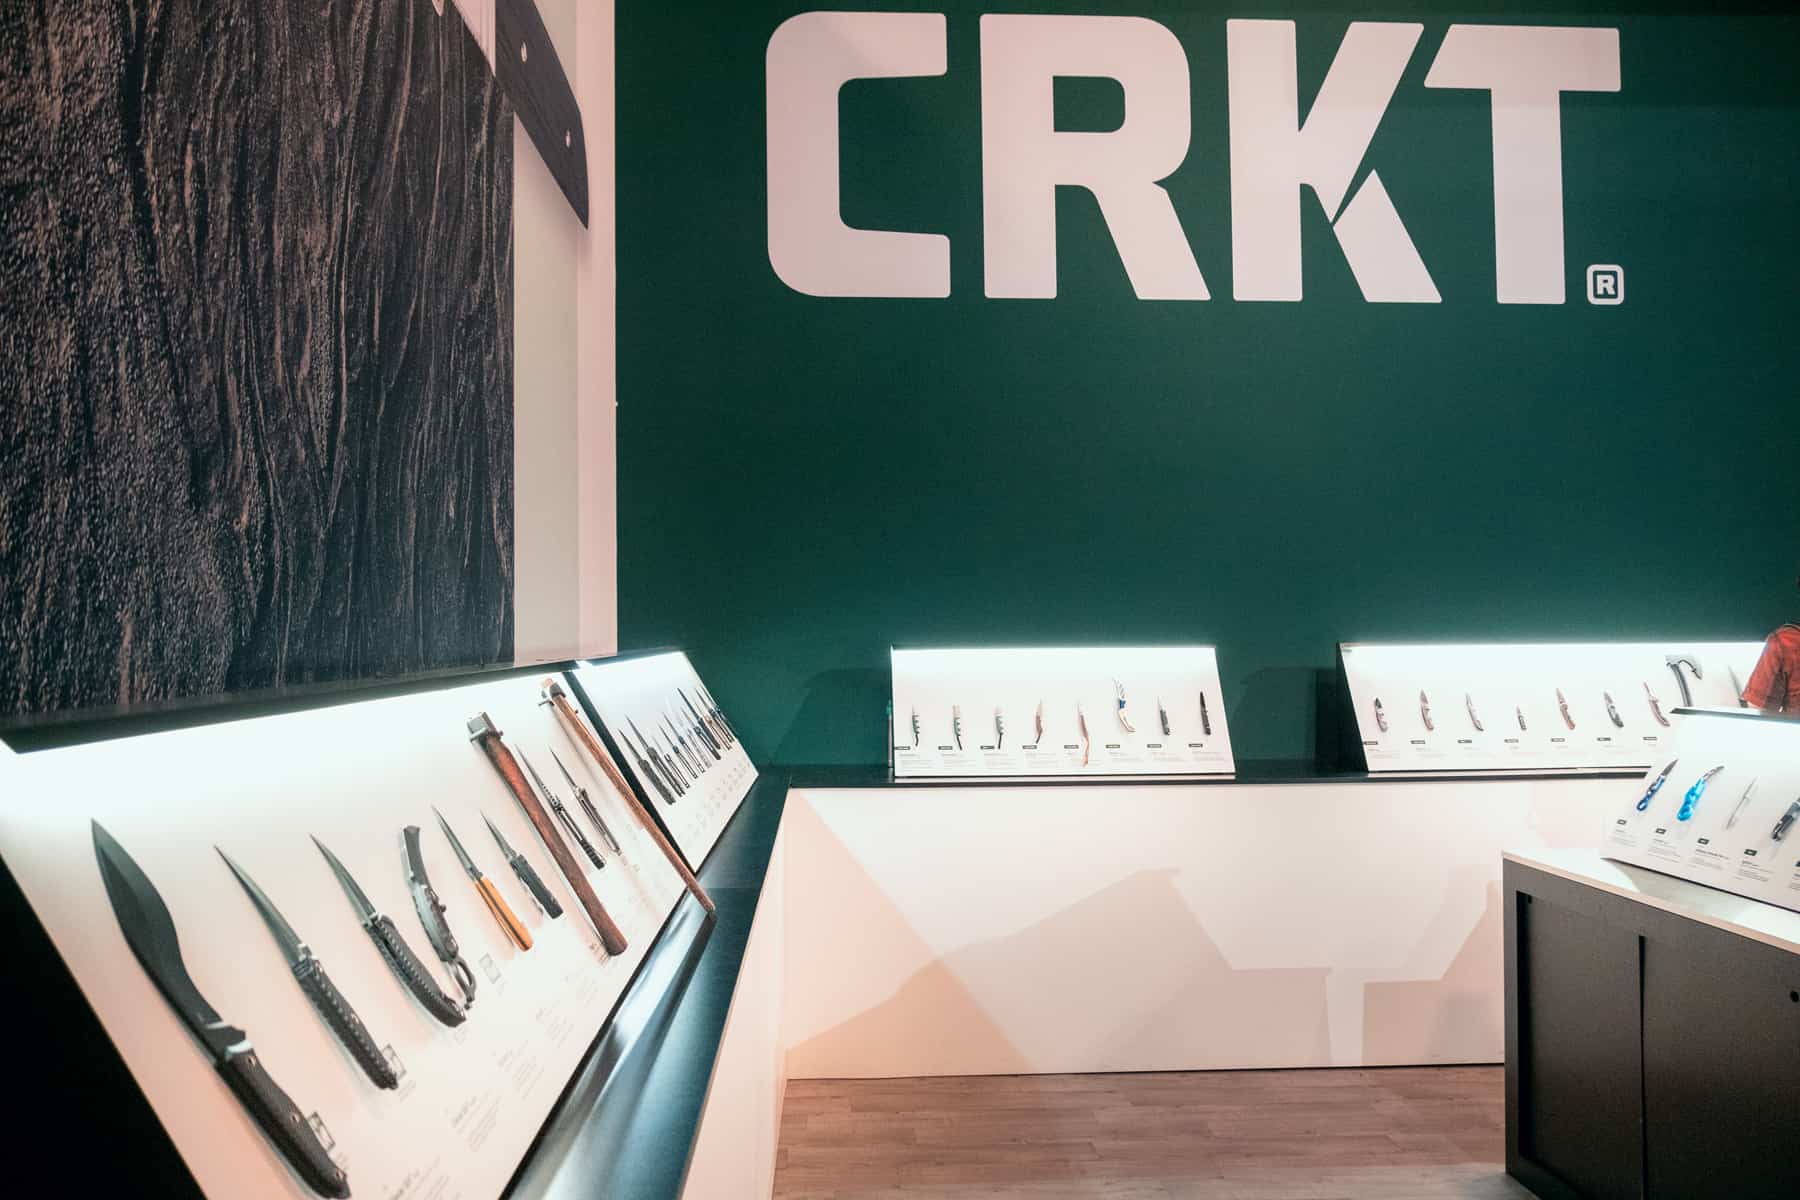 CRKT had a great looking booth at the 2023 SHOT Show full of new products.